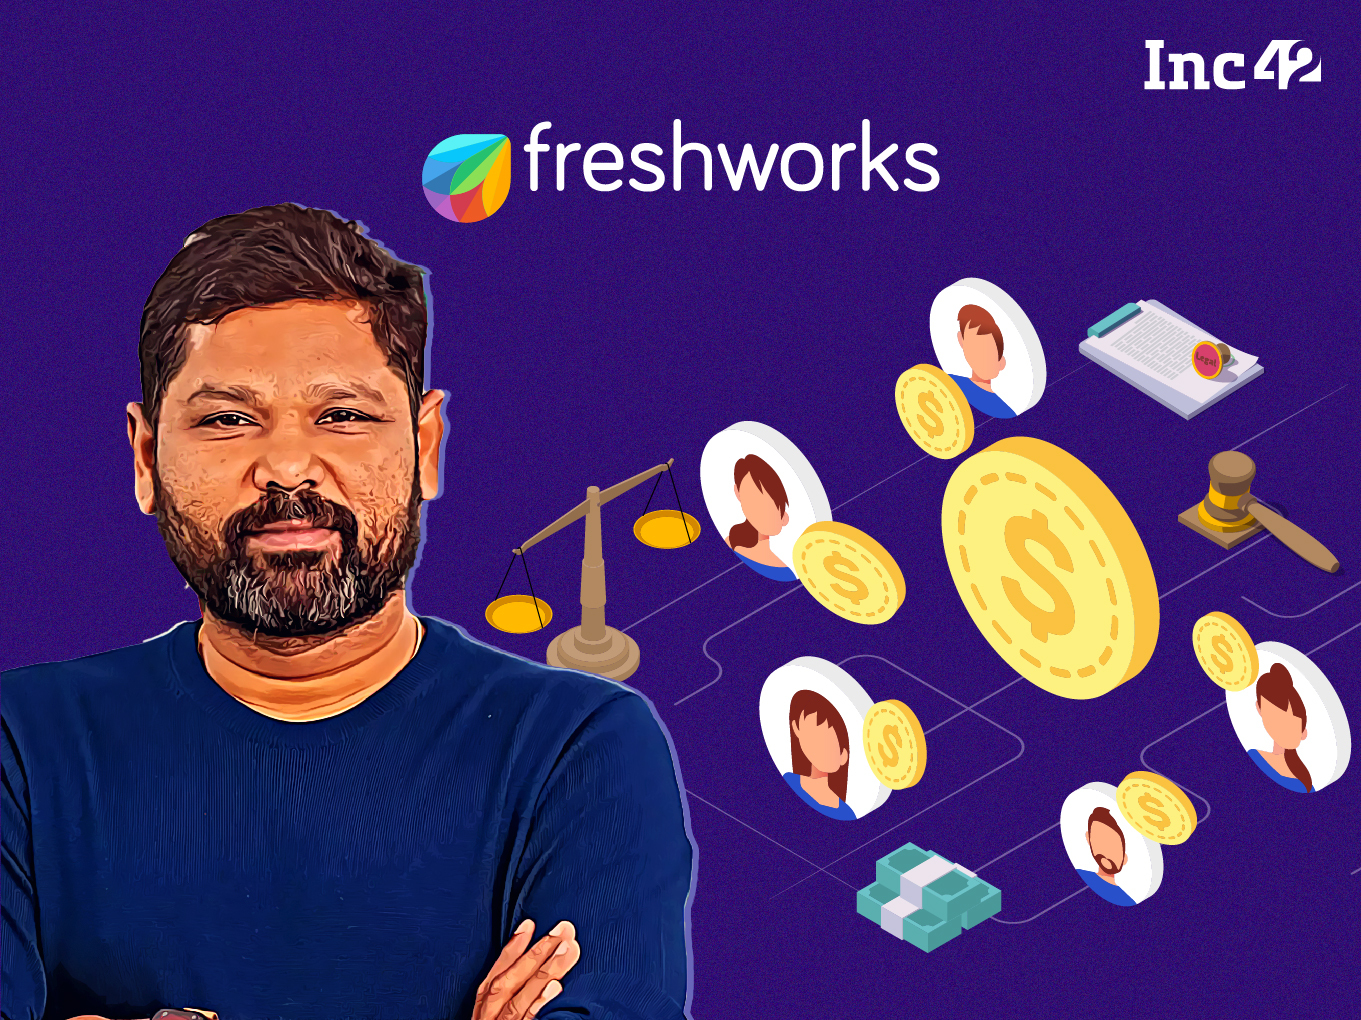 Freshworks’ Fresh Drama: Why The SaaS Giant Is Caught In A Legal Tangle